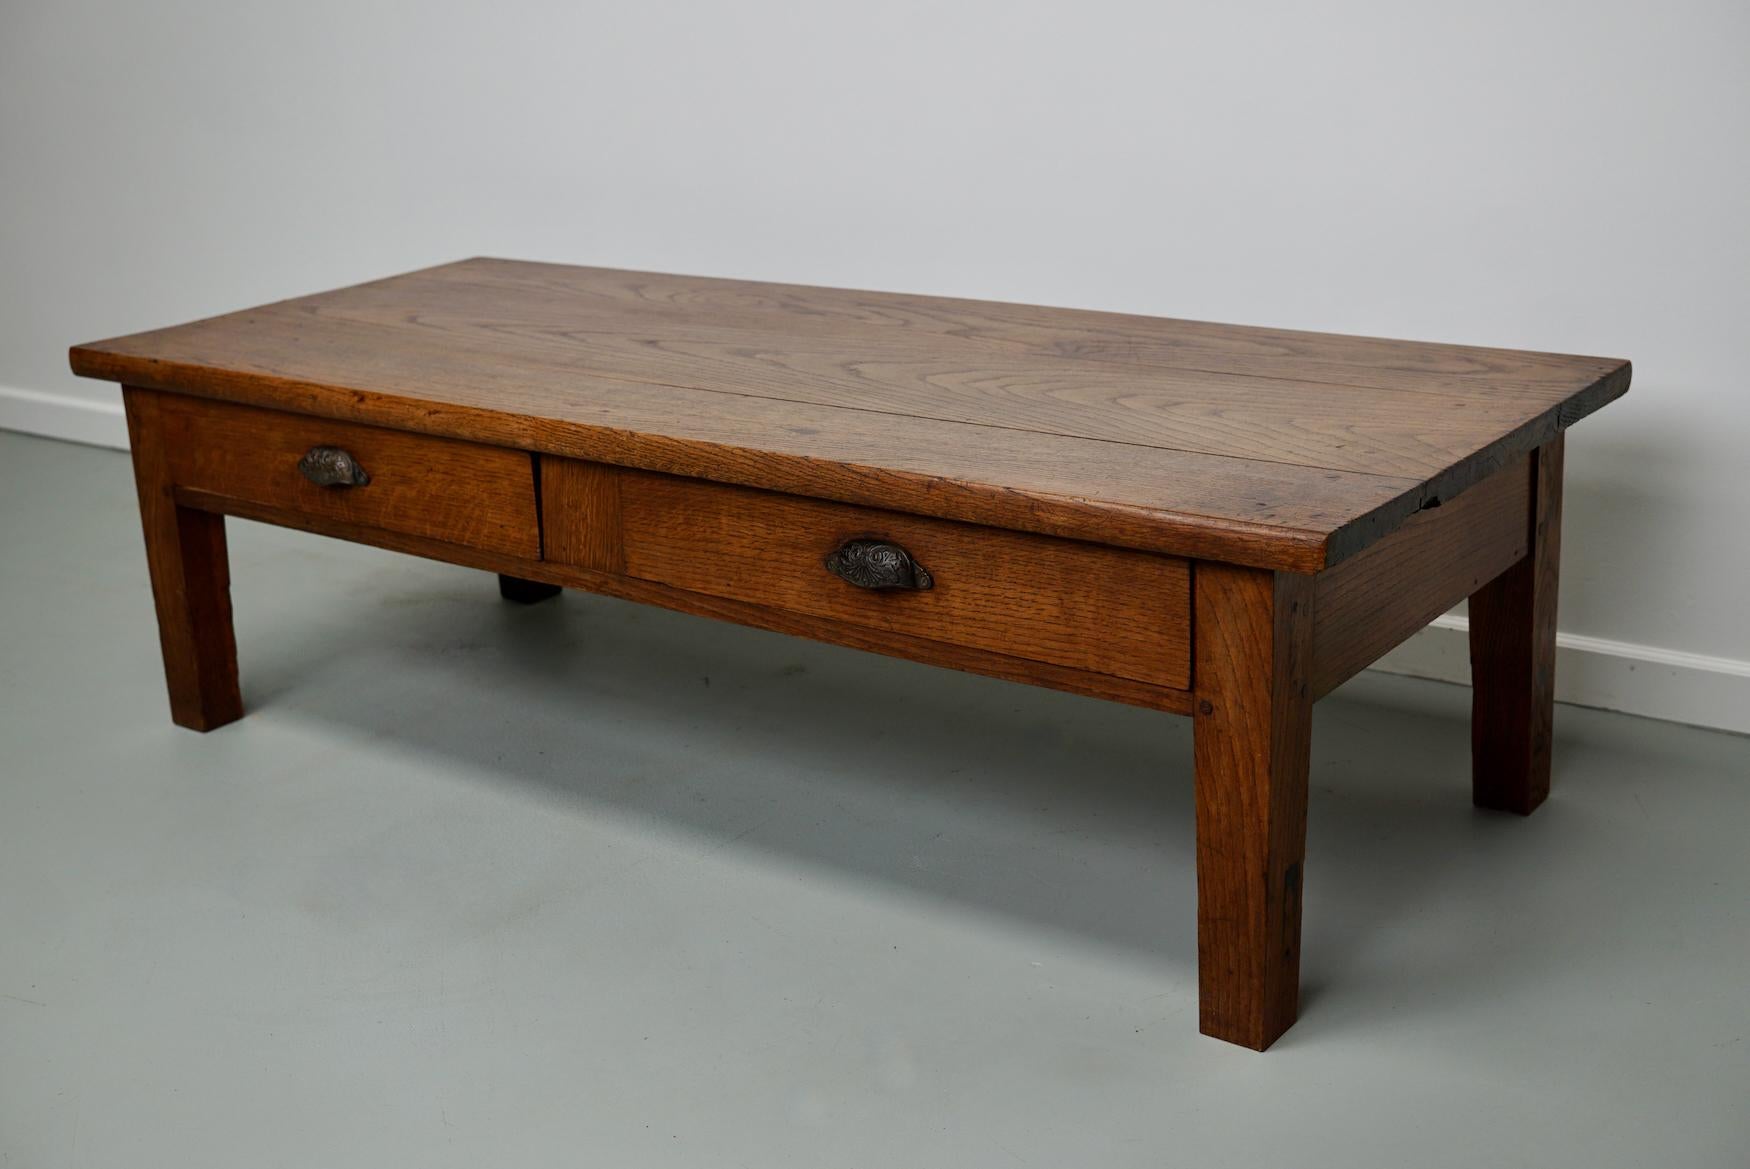 This coffee table was converted from an old 19th century oak farmhouse kitchen table. It retained a very nice patina and rich color over the years and has a practical size.